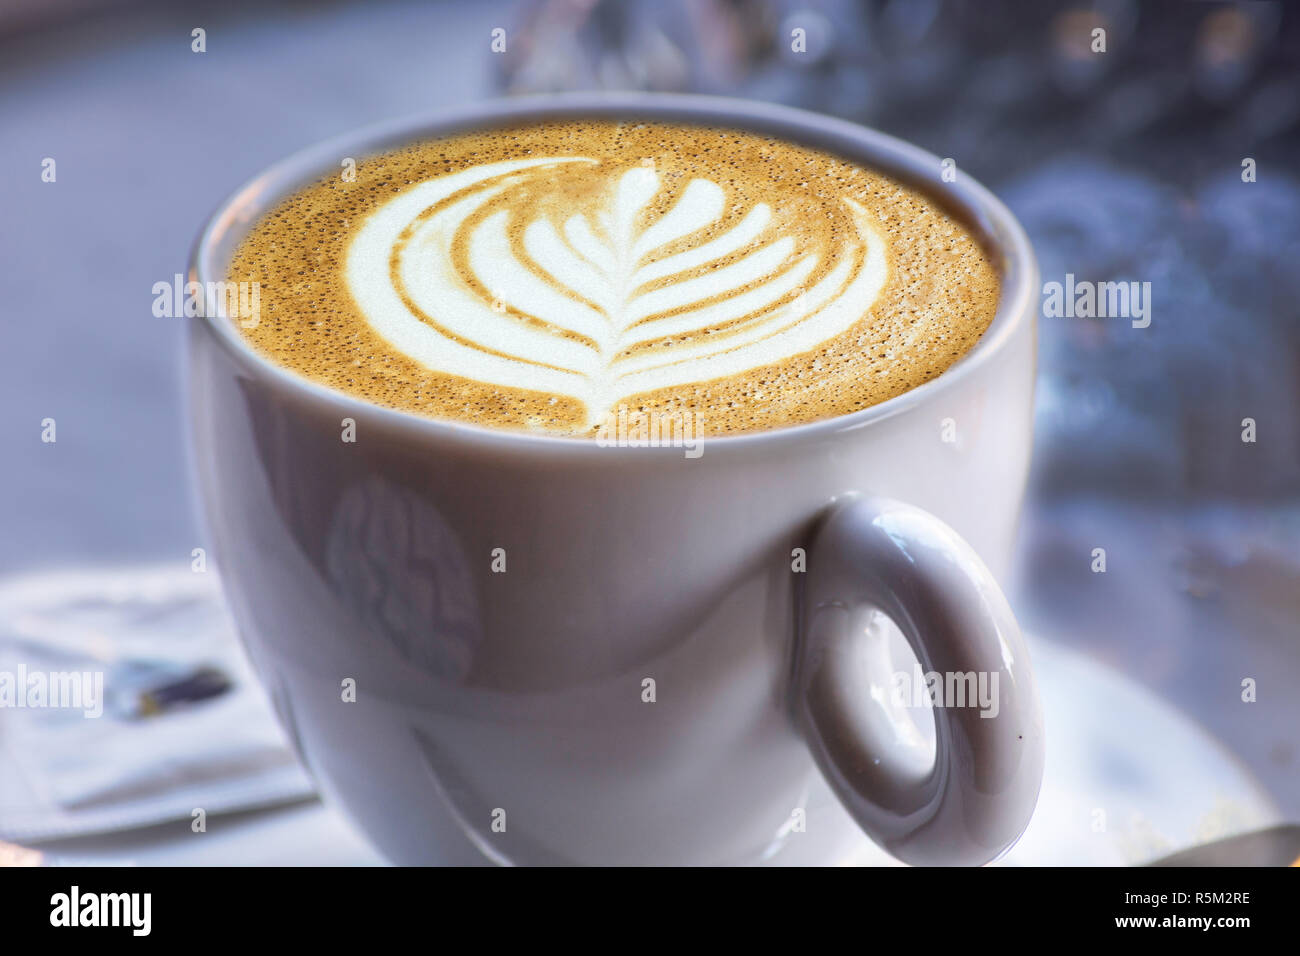 a white cup of coffee latte art Stock Photo